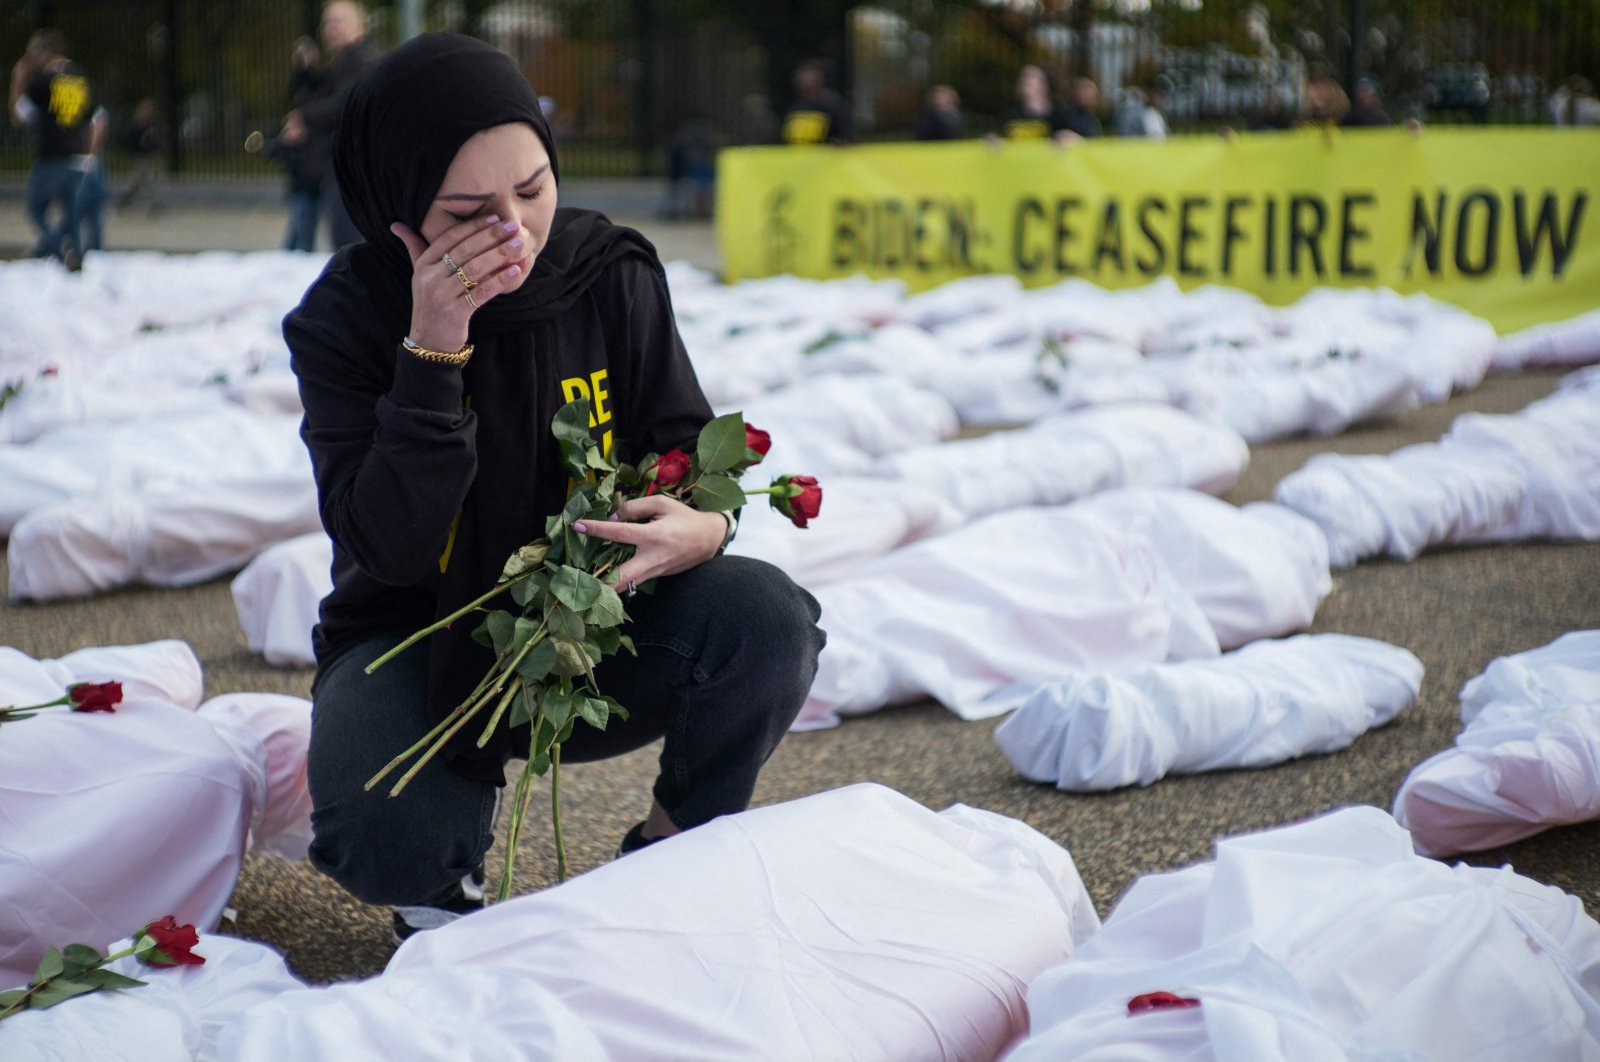 An activist wipes her eye while placing flowers on white-shrouded body bags representing victims in the Israeli-Palestinian conflict, in front of the White House, Washington, D.C., U.S., Nov. 15, 2023. (AFP Photo)